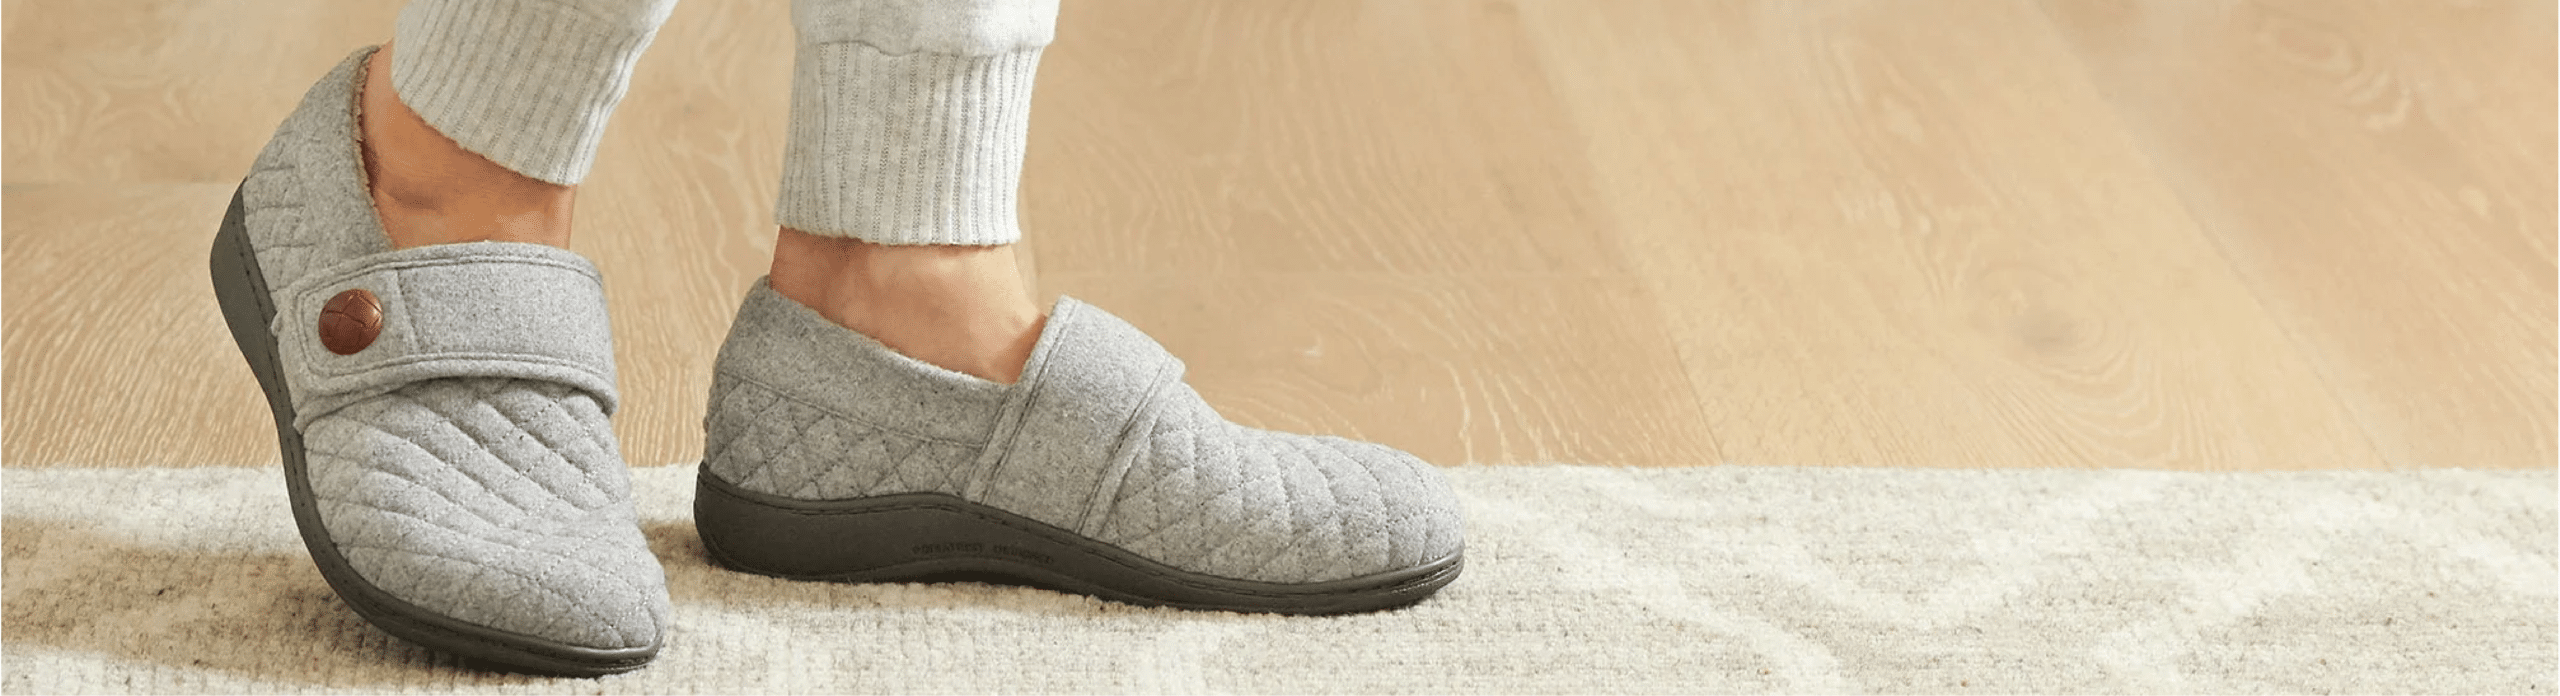 Slippers with Support | The Bone Store 